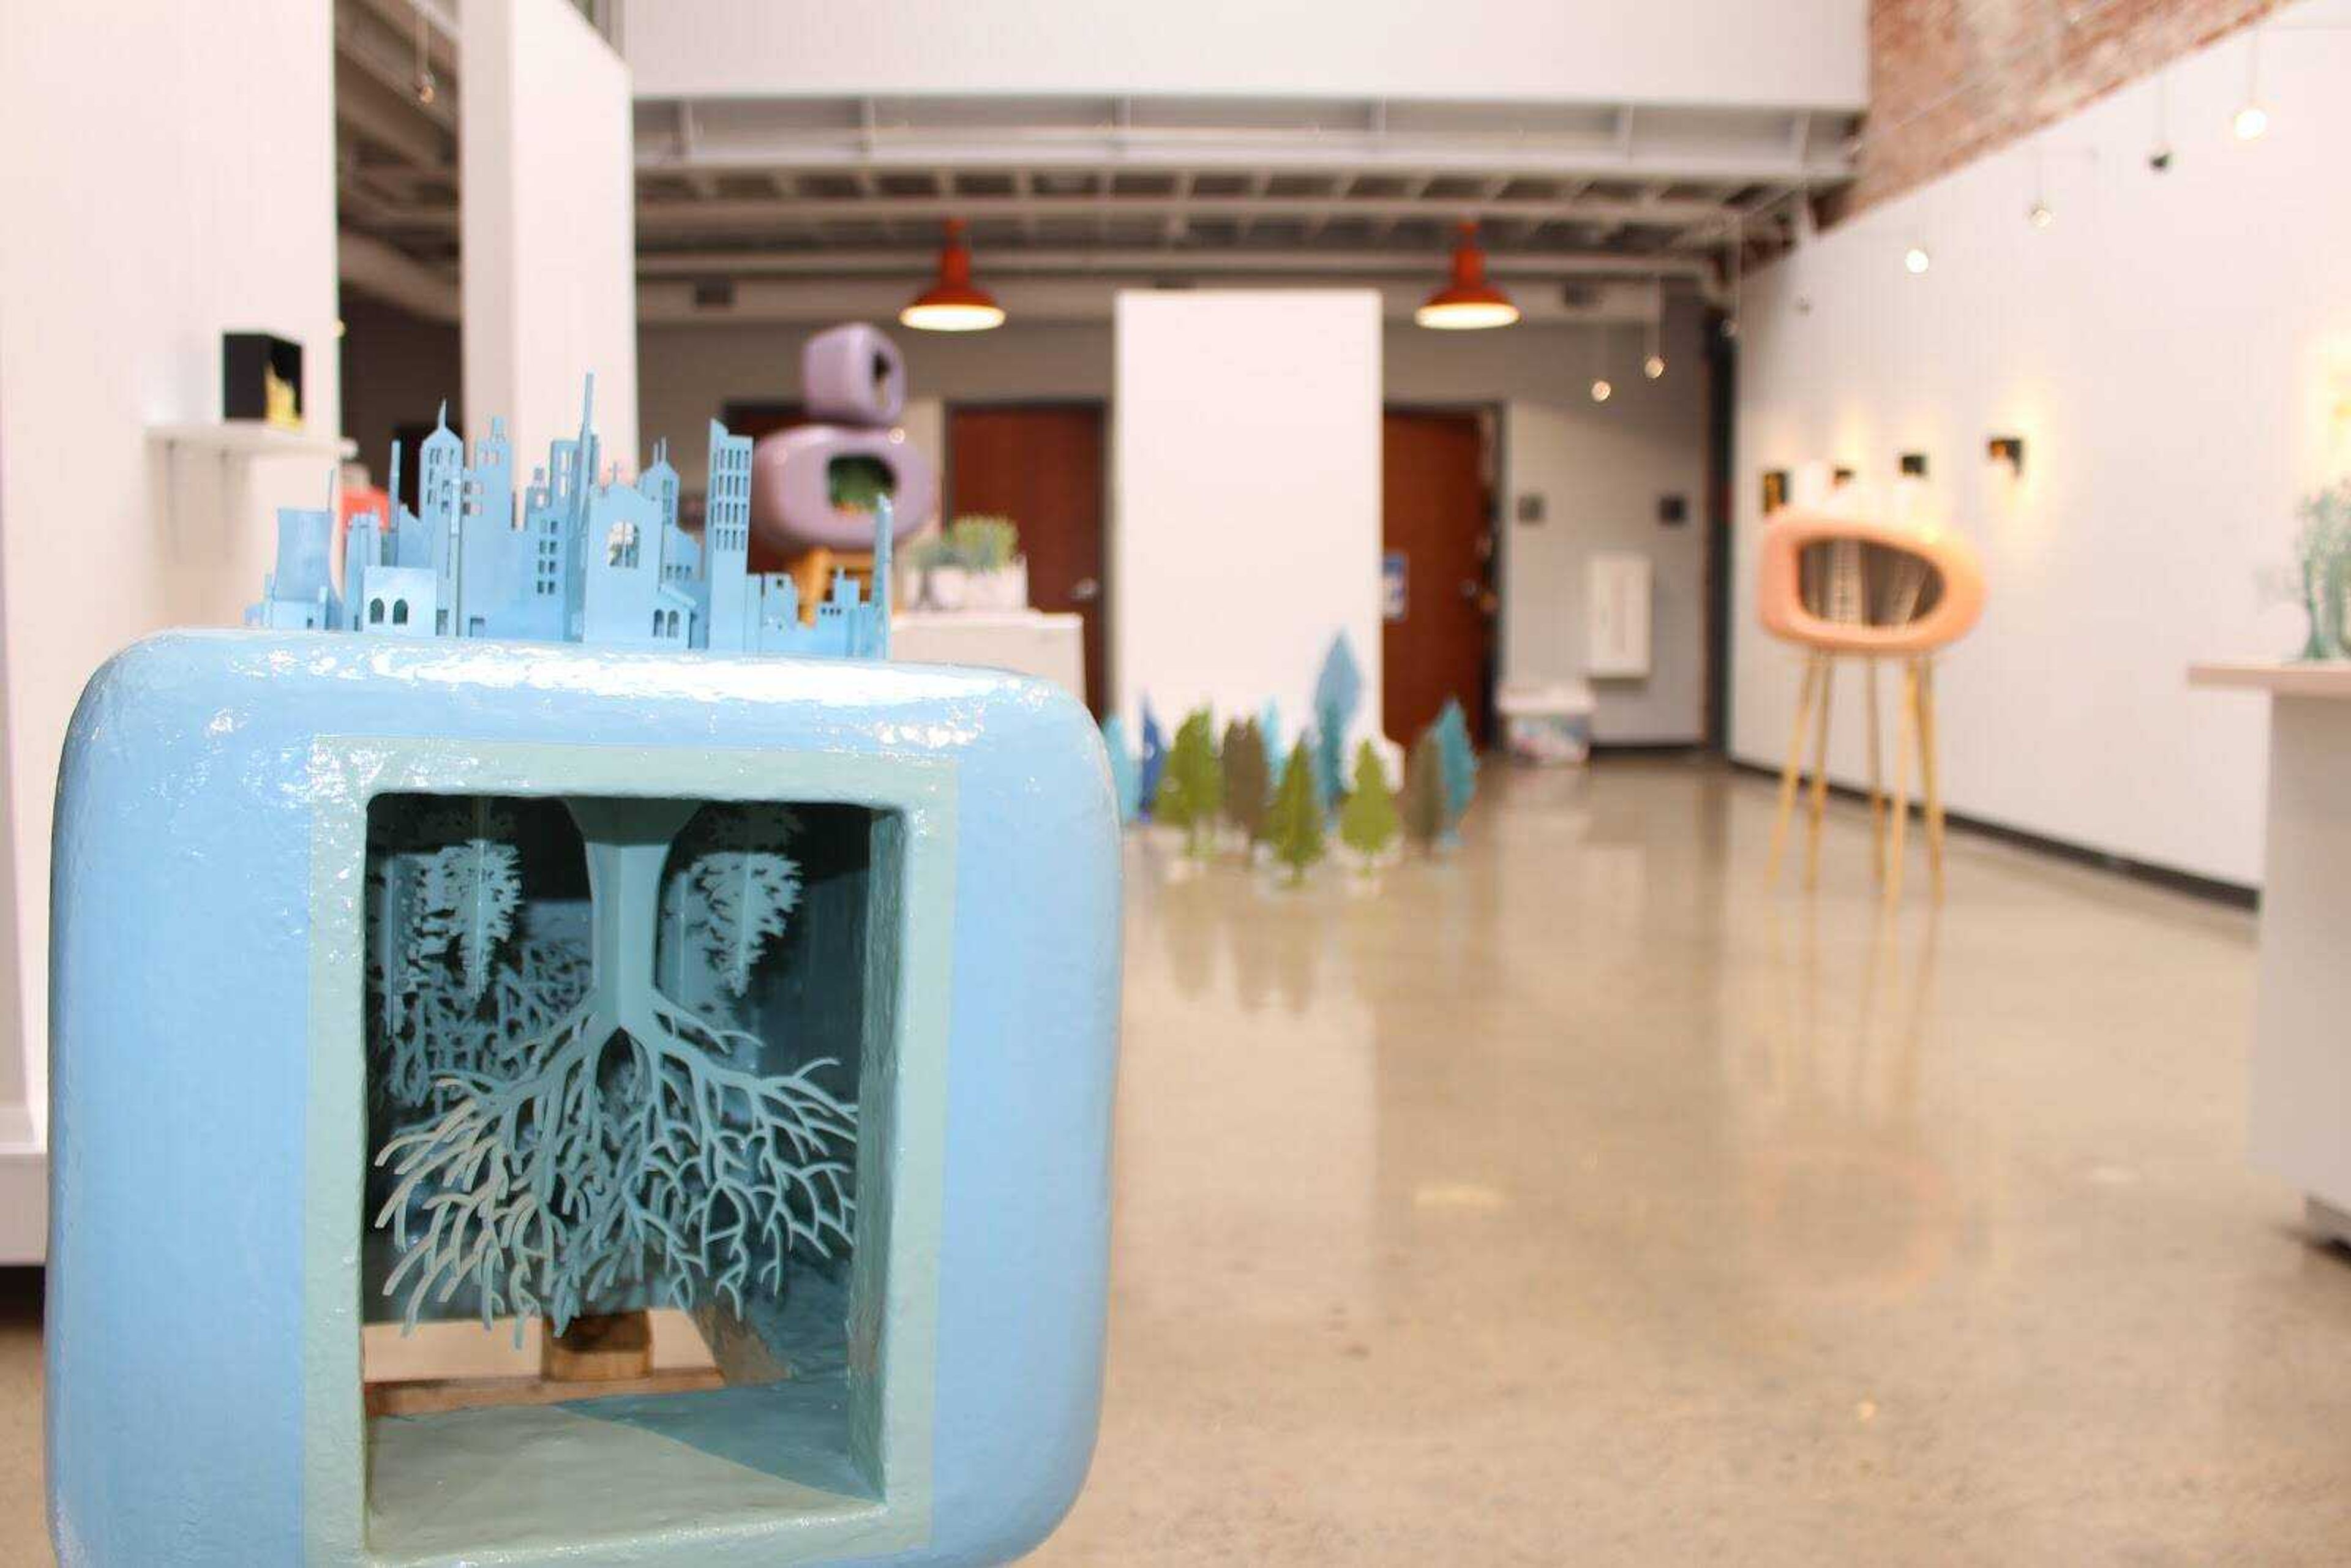 Jennifer Torres, associate professor of sculpture and ceramics at the University Southern Mississippi, displayed her exhibition piece at Catapult Creative House through the month of September. Viewers were able to see her work titled “Mental Landscapes.” 